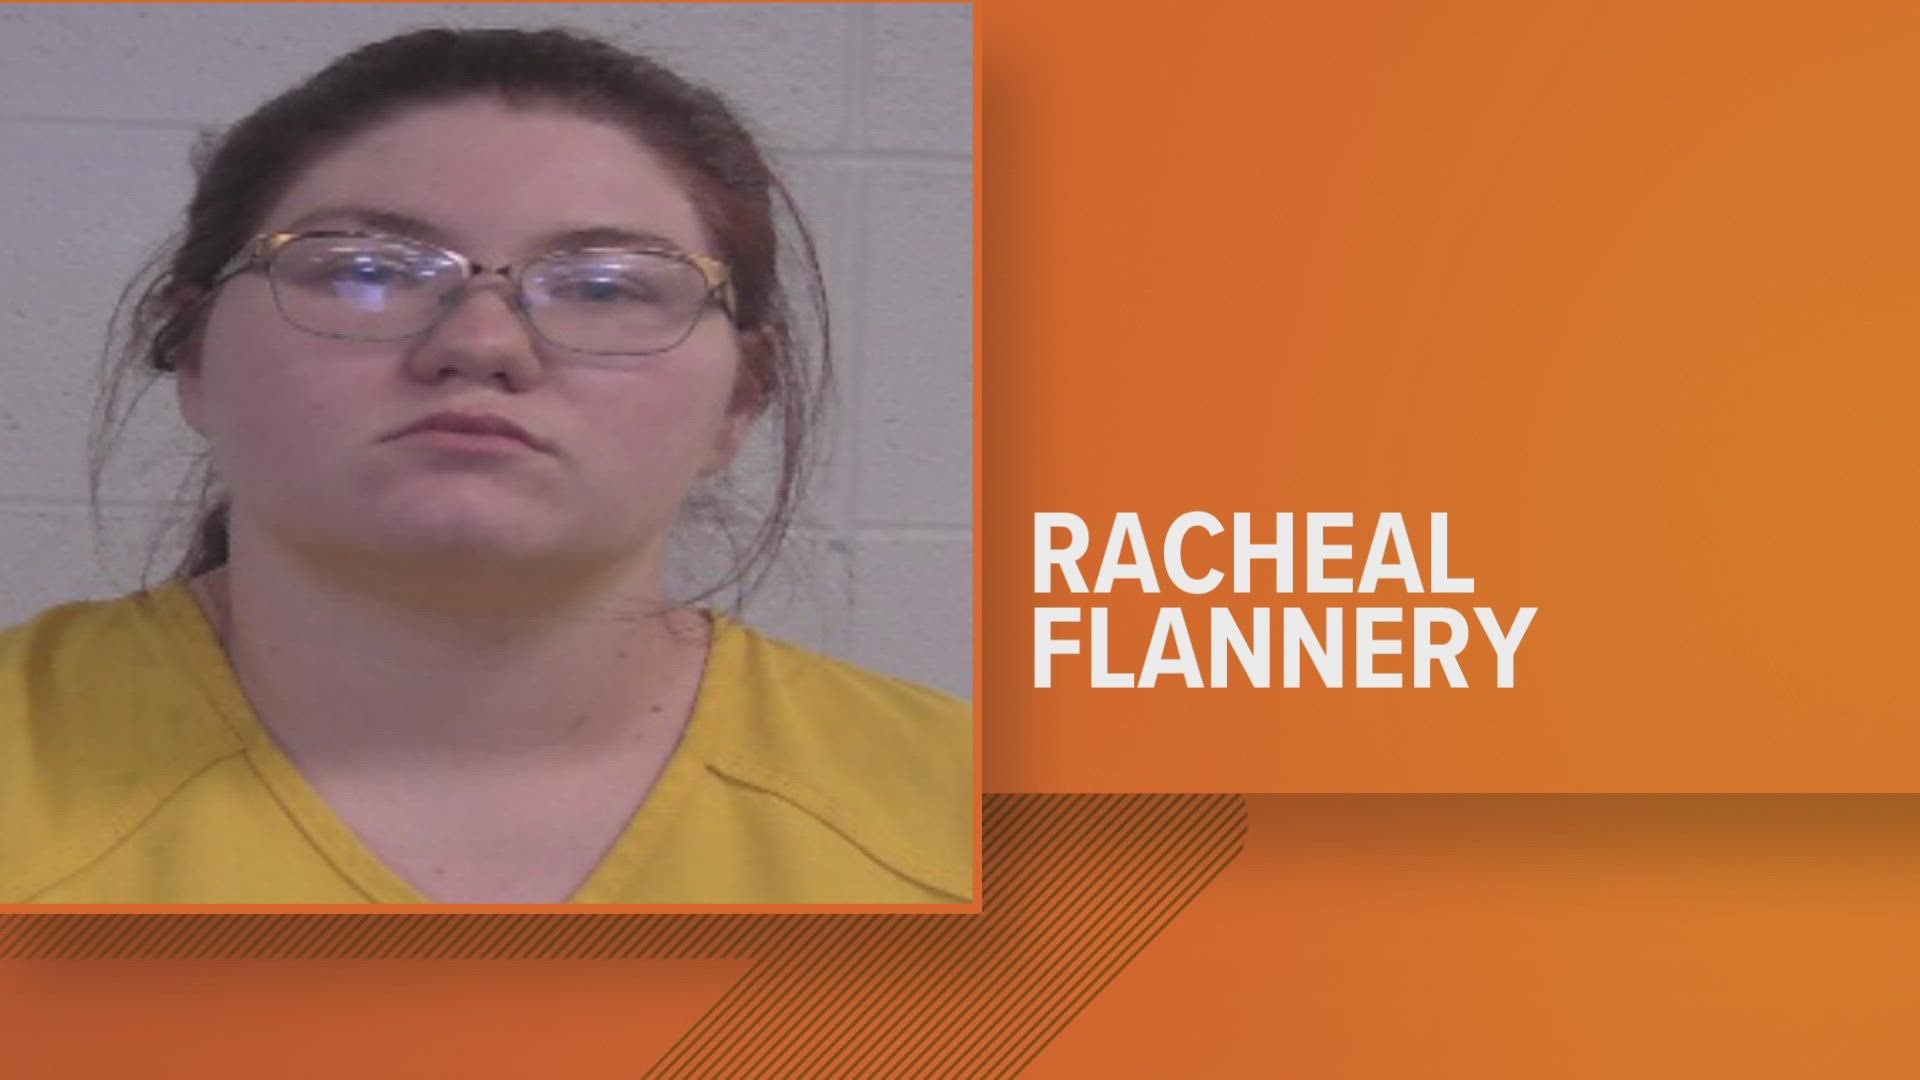 24-year-old Rachael Flannery is charged with three counts of criminal abuse of children 12-years-old or younger.